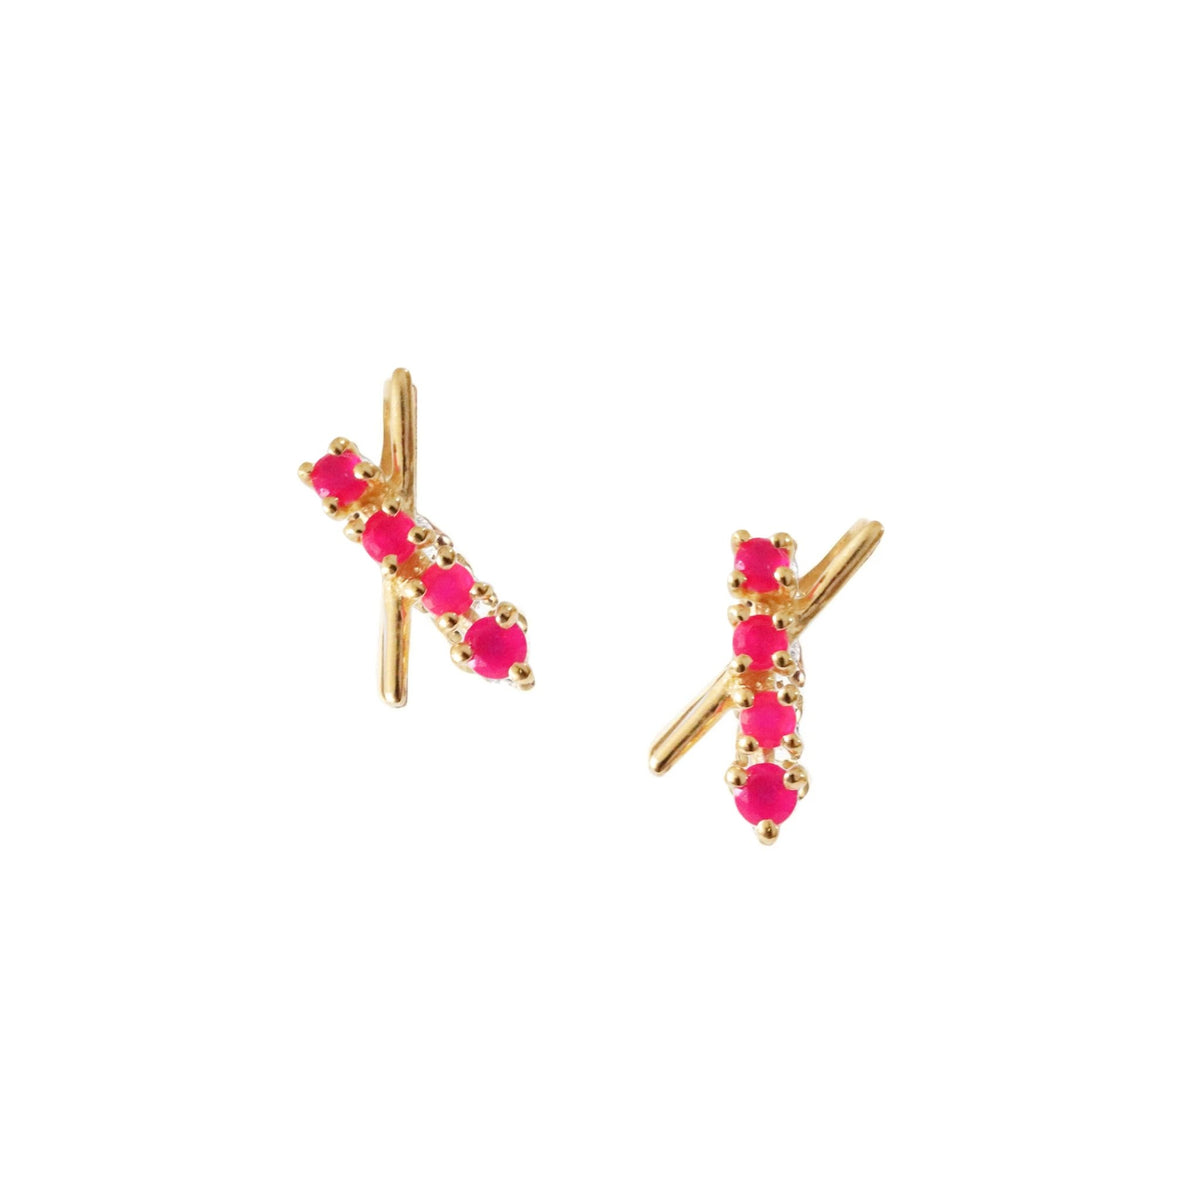 TINY DREAM STARDUST STUDS - HOT PINK CHALCEDONY &amp; GOLD - SO PRETTY CARA COTTER